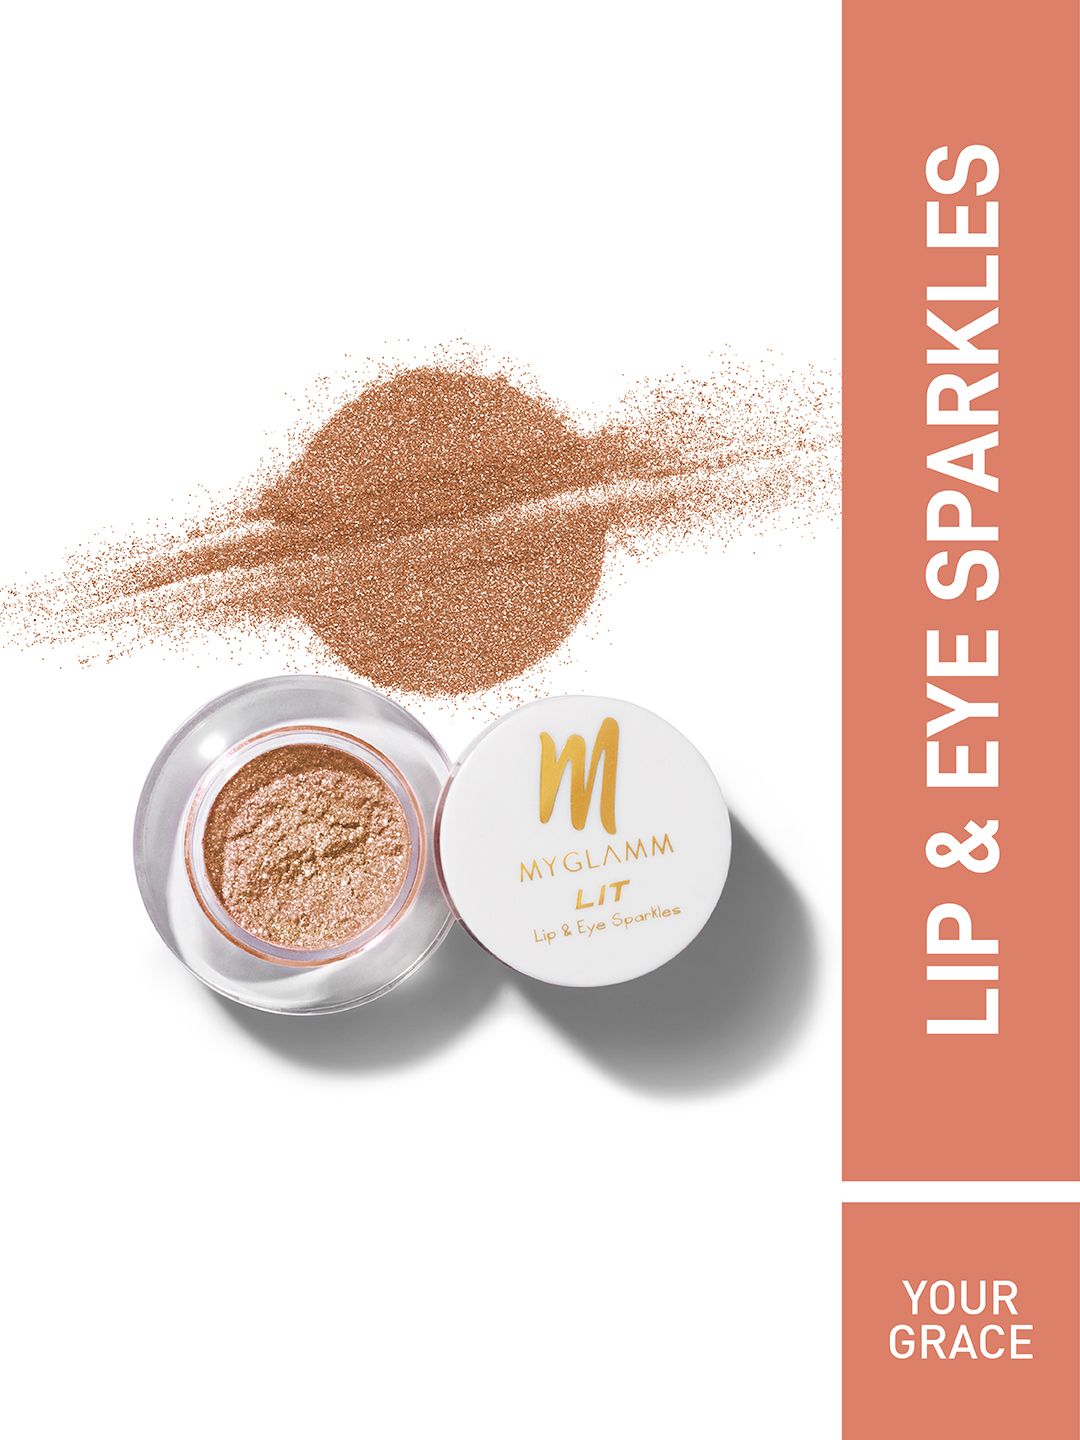 MyGlamm Lit Lip & Eye Sparkles - Your Grace Price in India